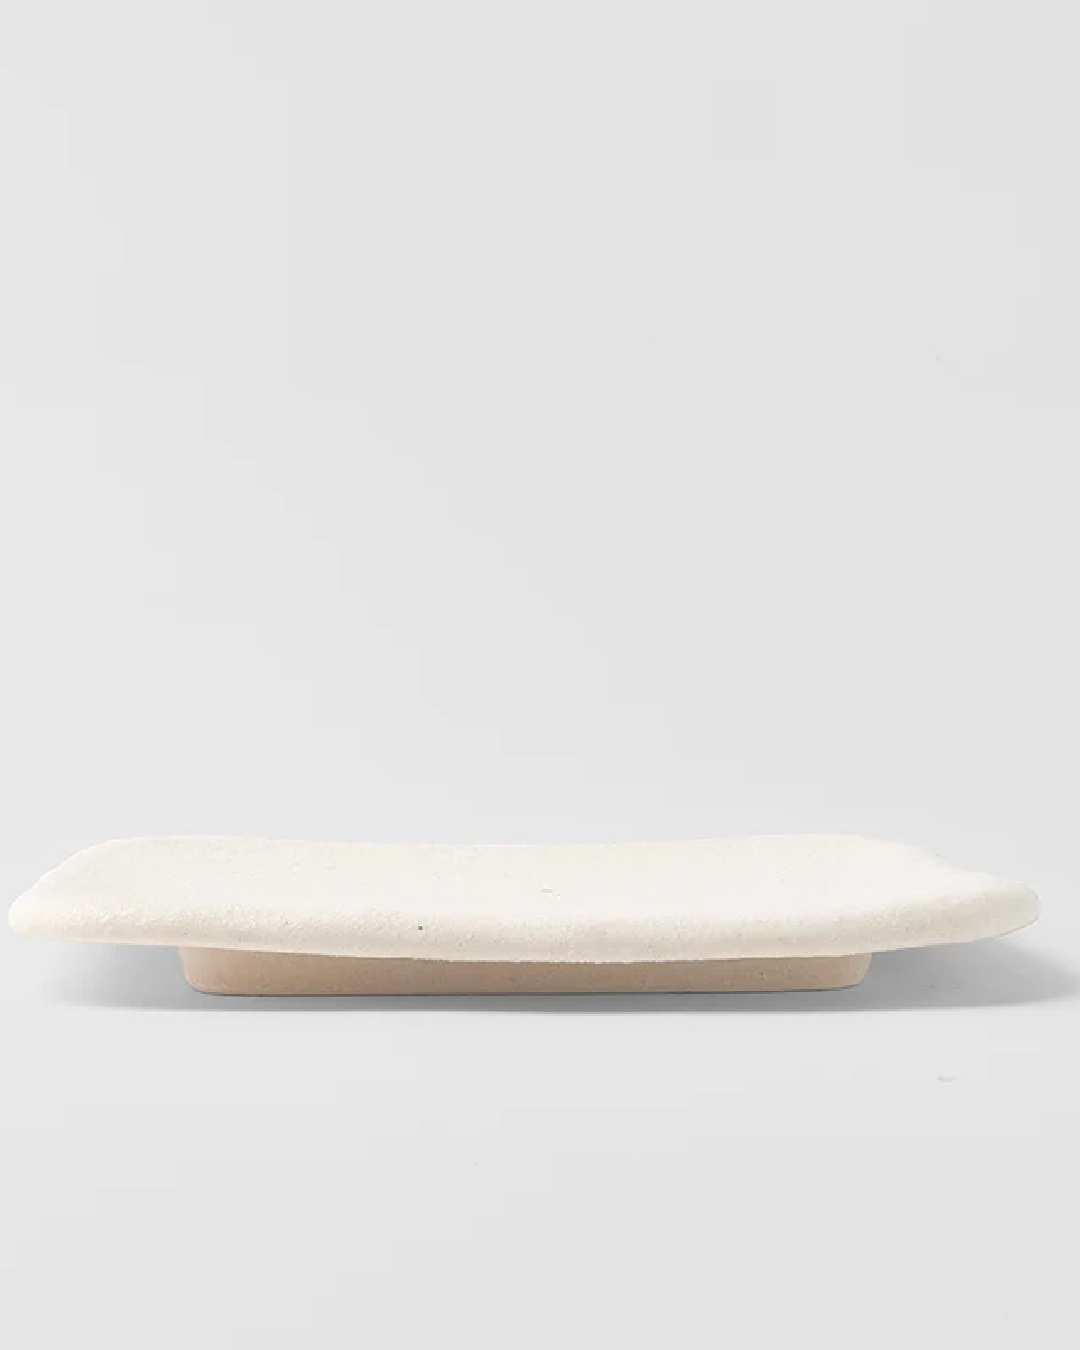 Shell white square slab or sushi plate